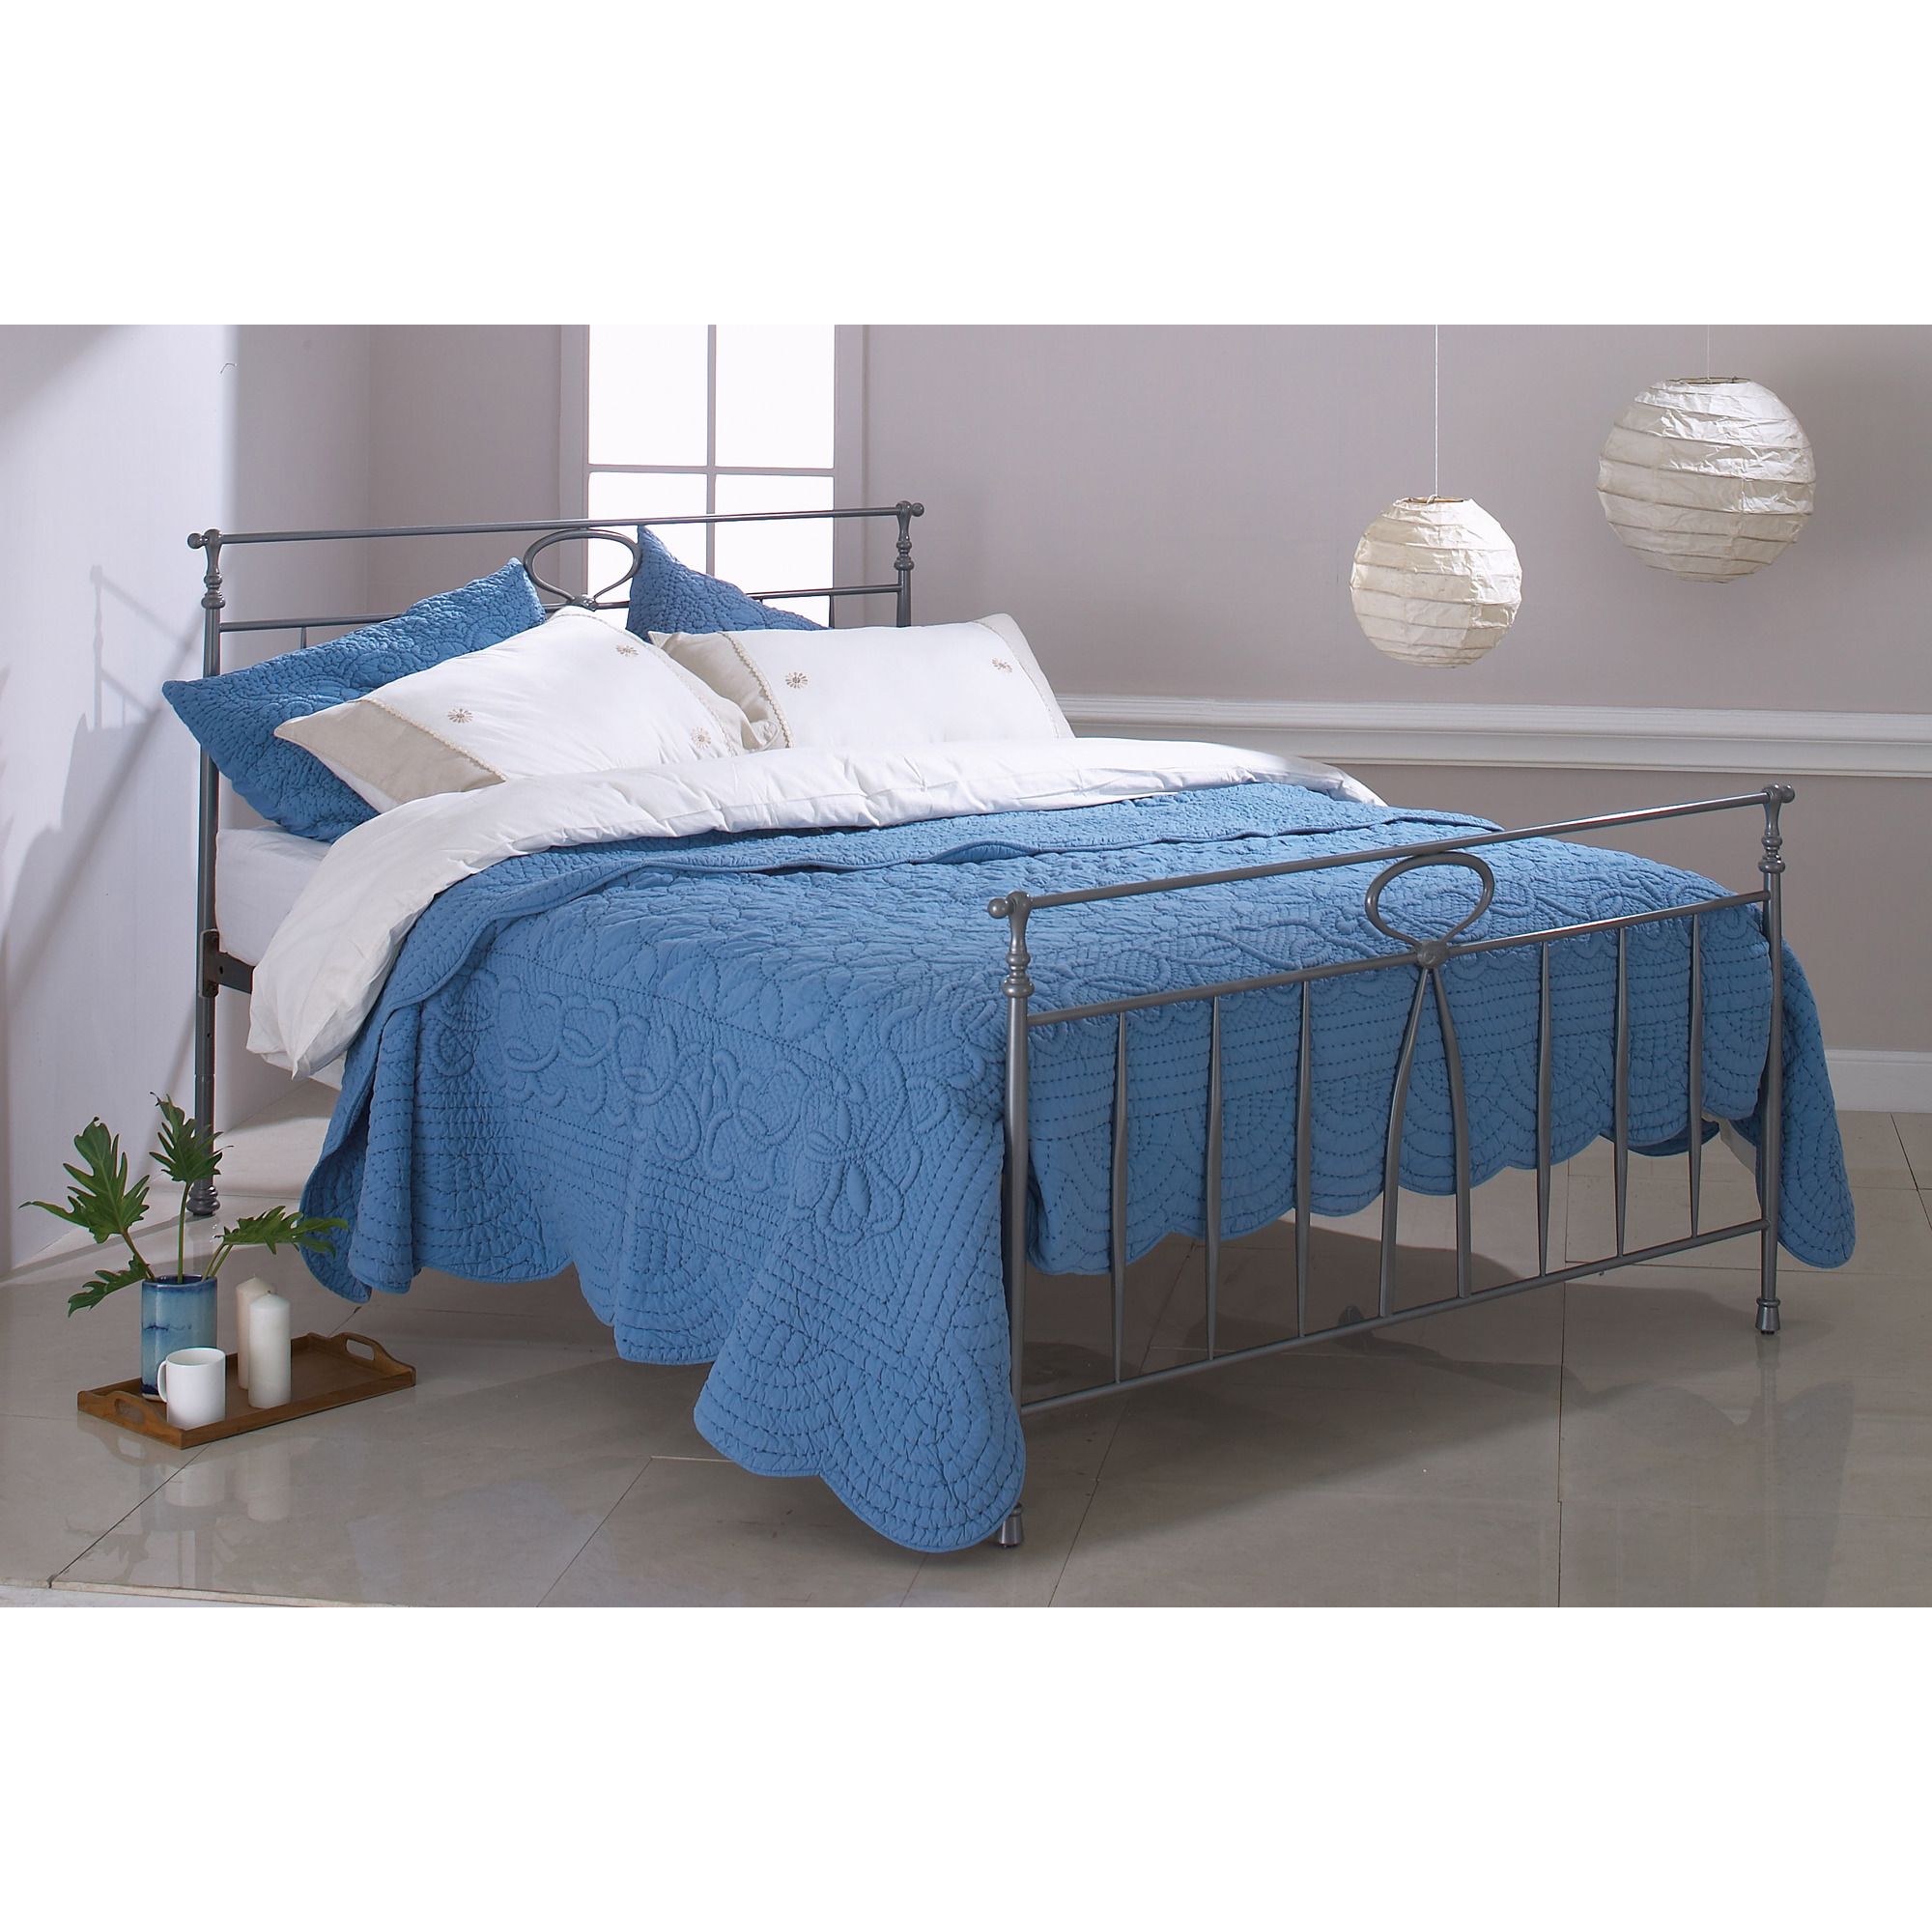 OBC Rora Bed Frame - Double - Pewter at Tescos Direct